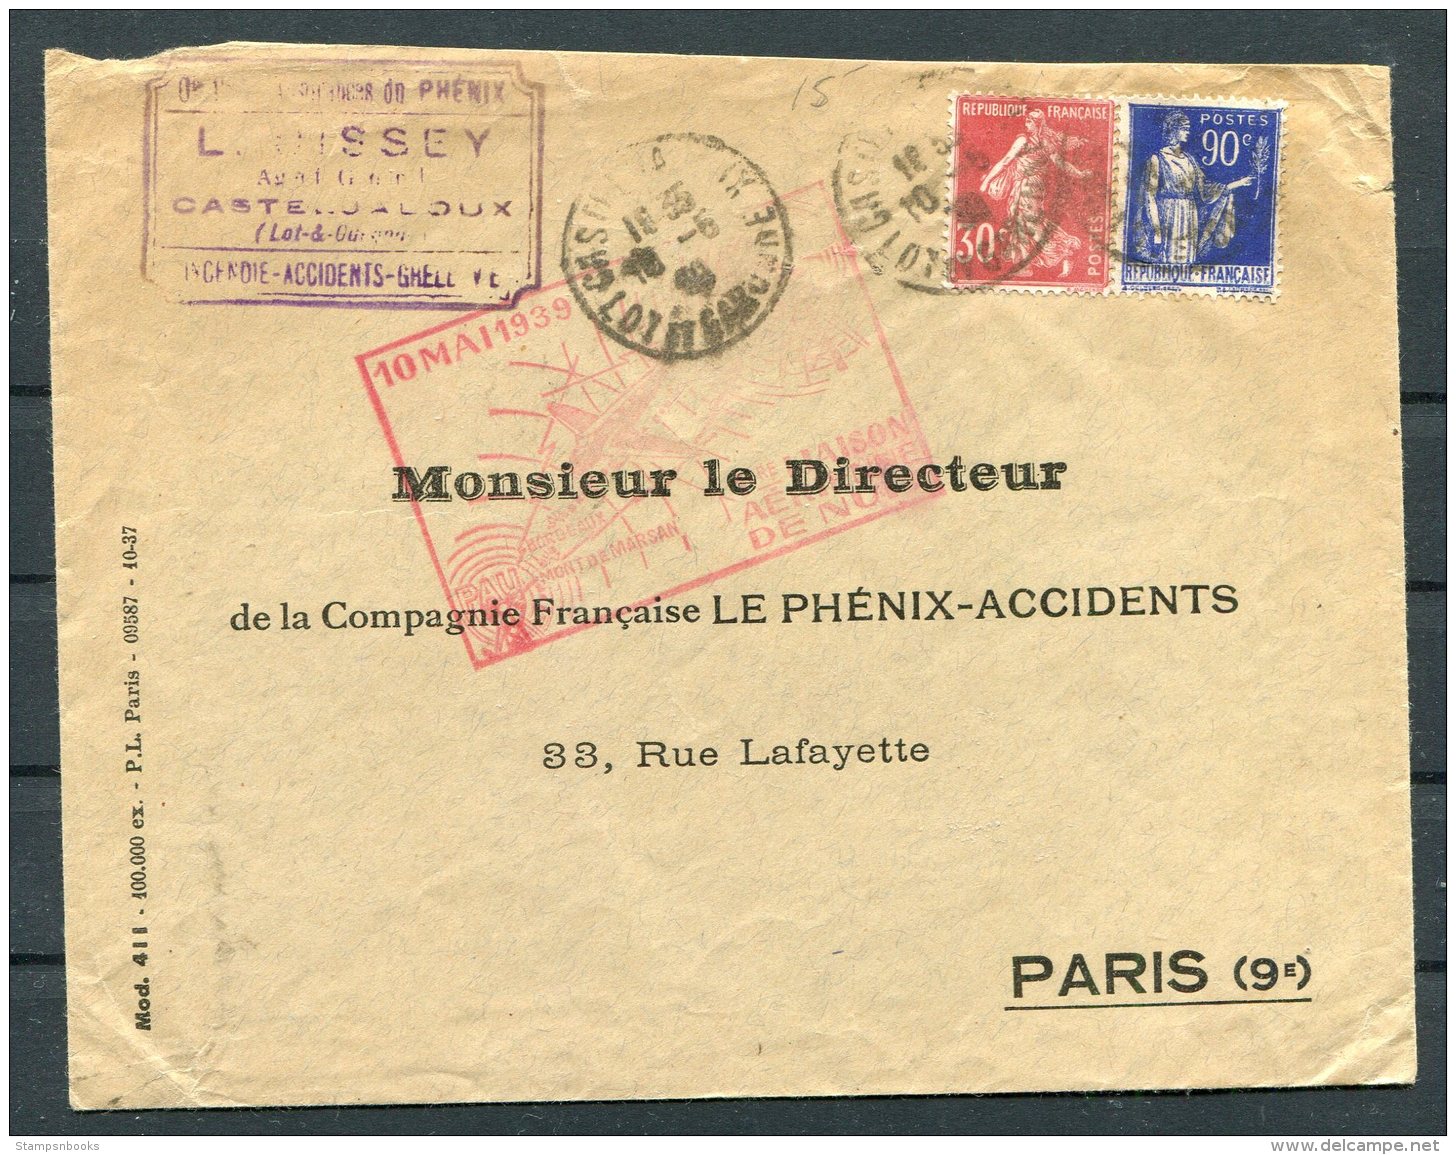 1939 France Airmail Flight Cover - 1927-1959 Covers & Documents